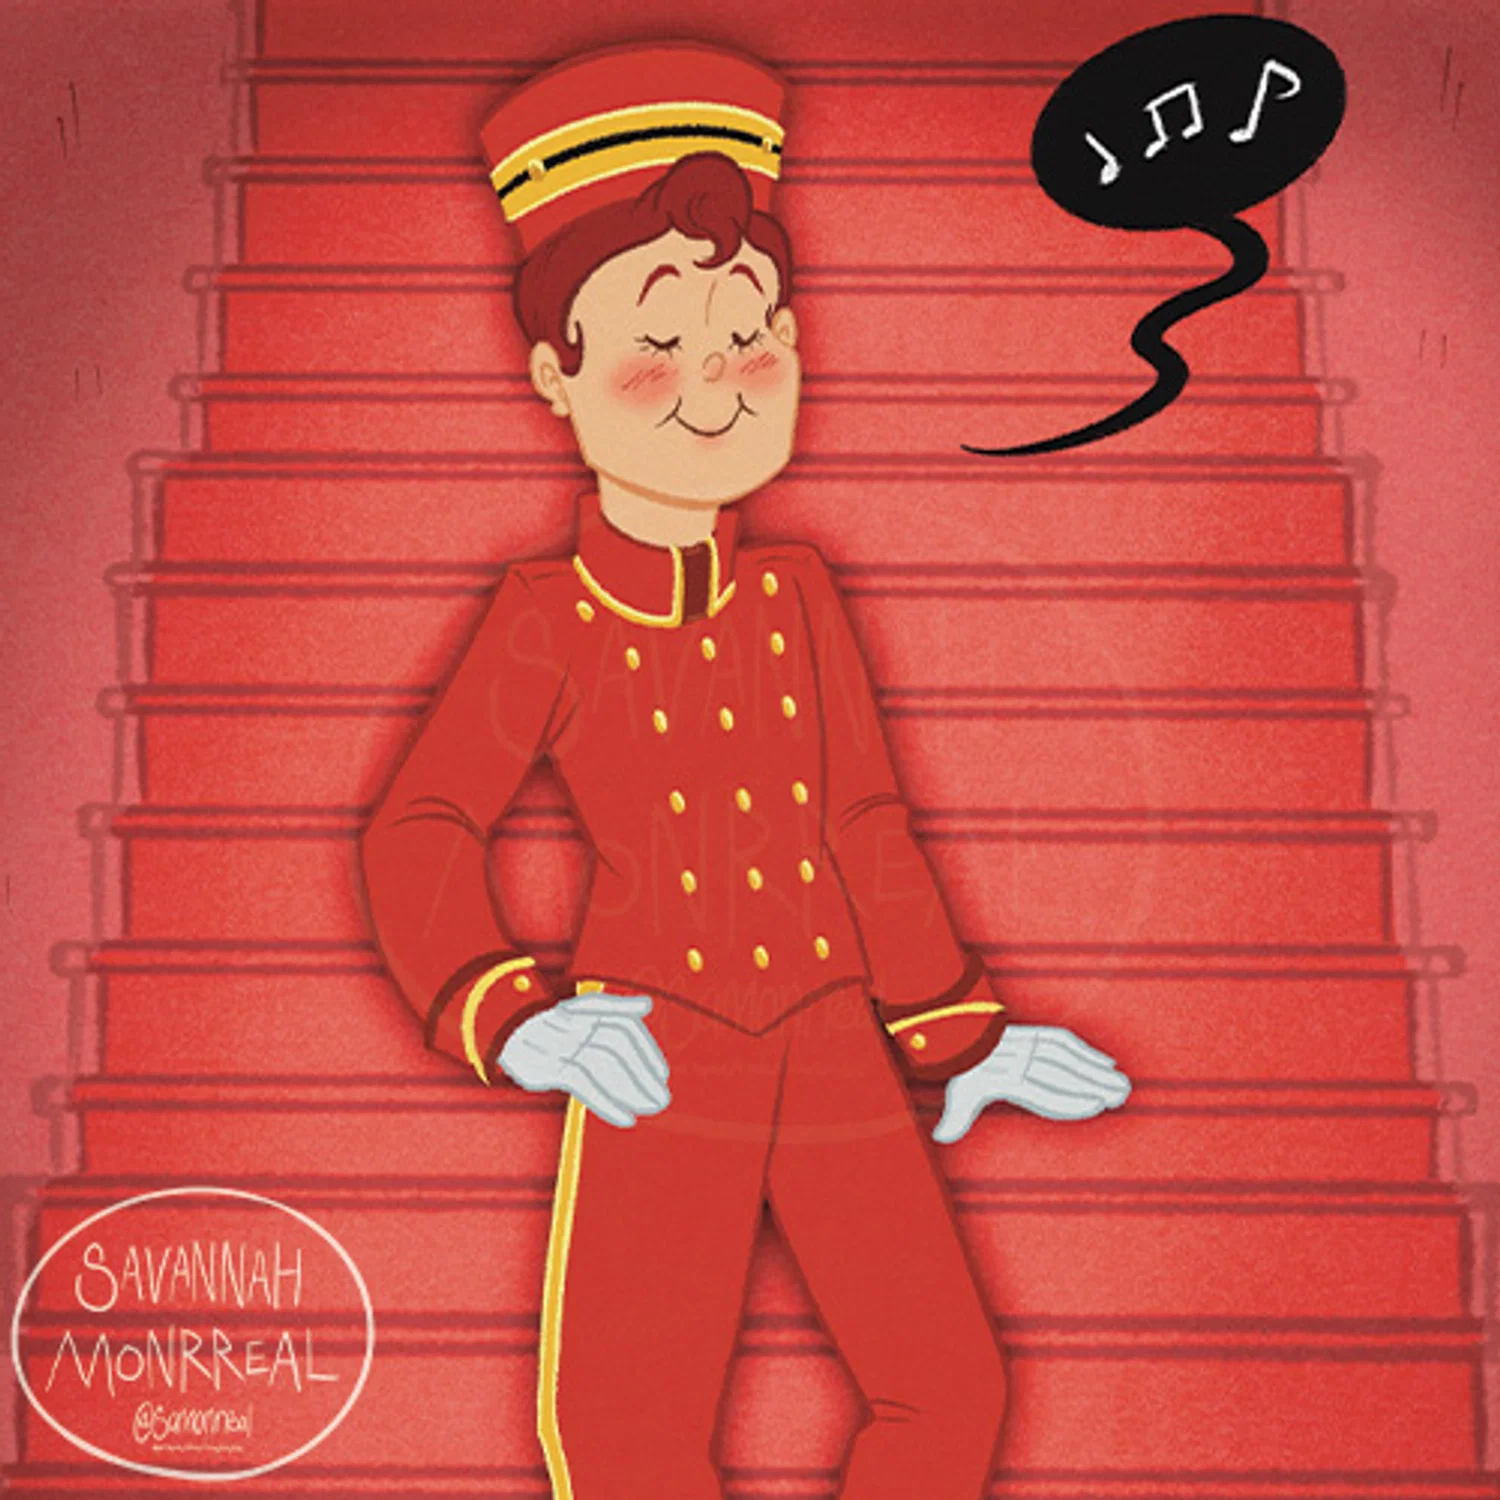 Bellhop protagonist is walking down red hued stairs. A black speech bubble next to his has white music notes, implying that he's humming. His eyes are closed and he has a content smile. There is a watermark in the corner that says "Savannah Monrreal @samonrreal"